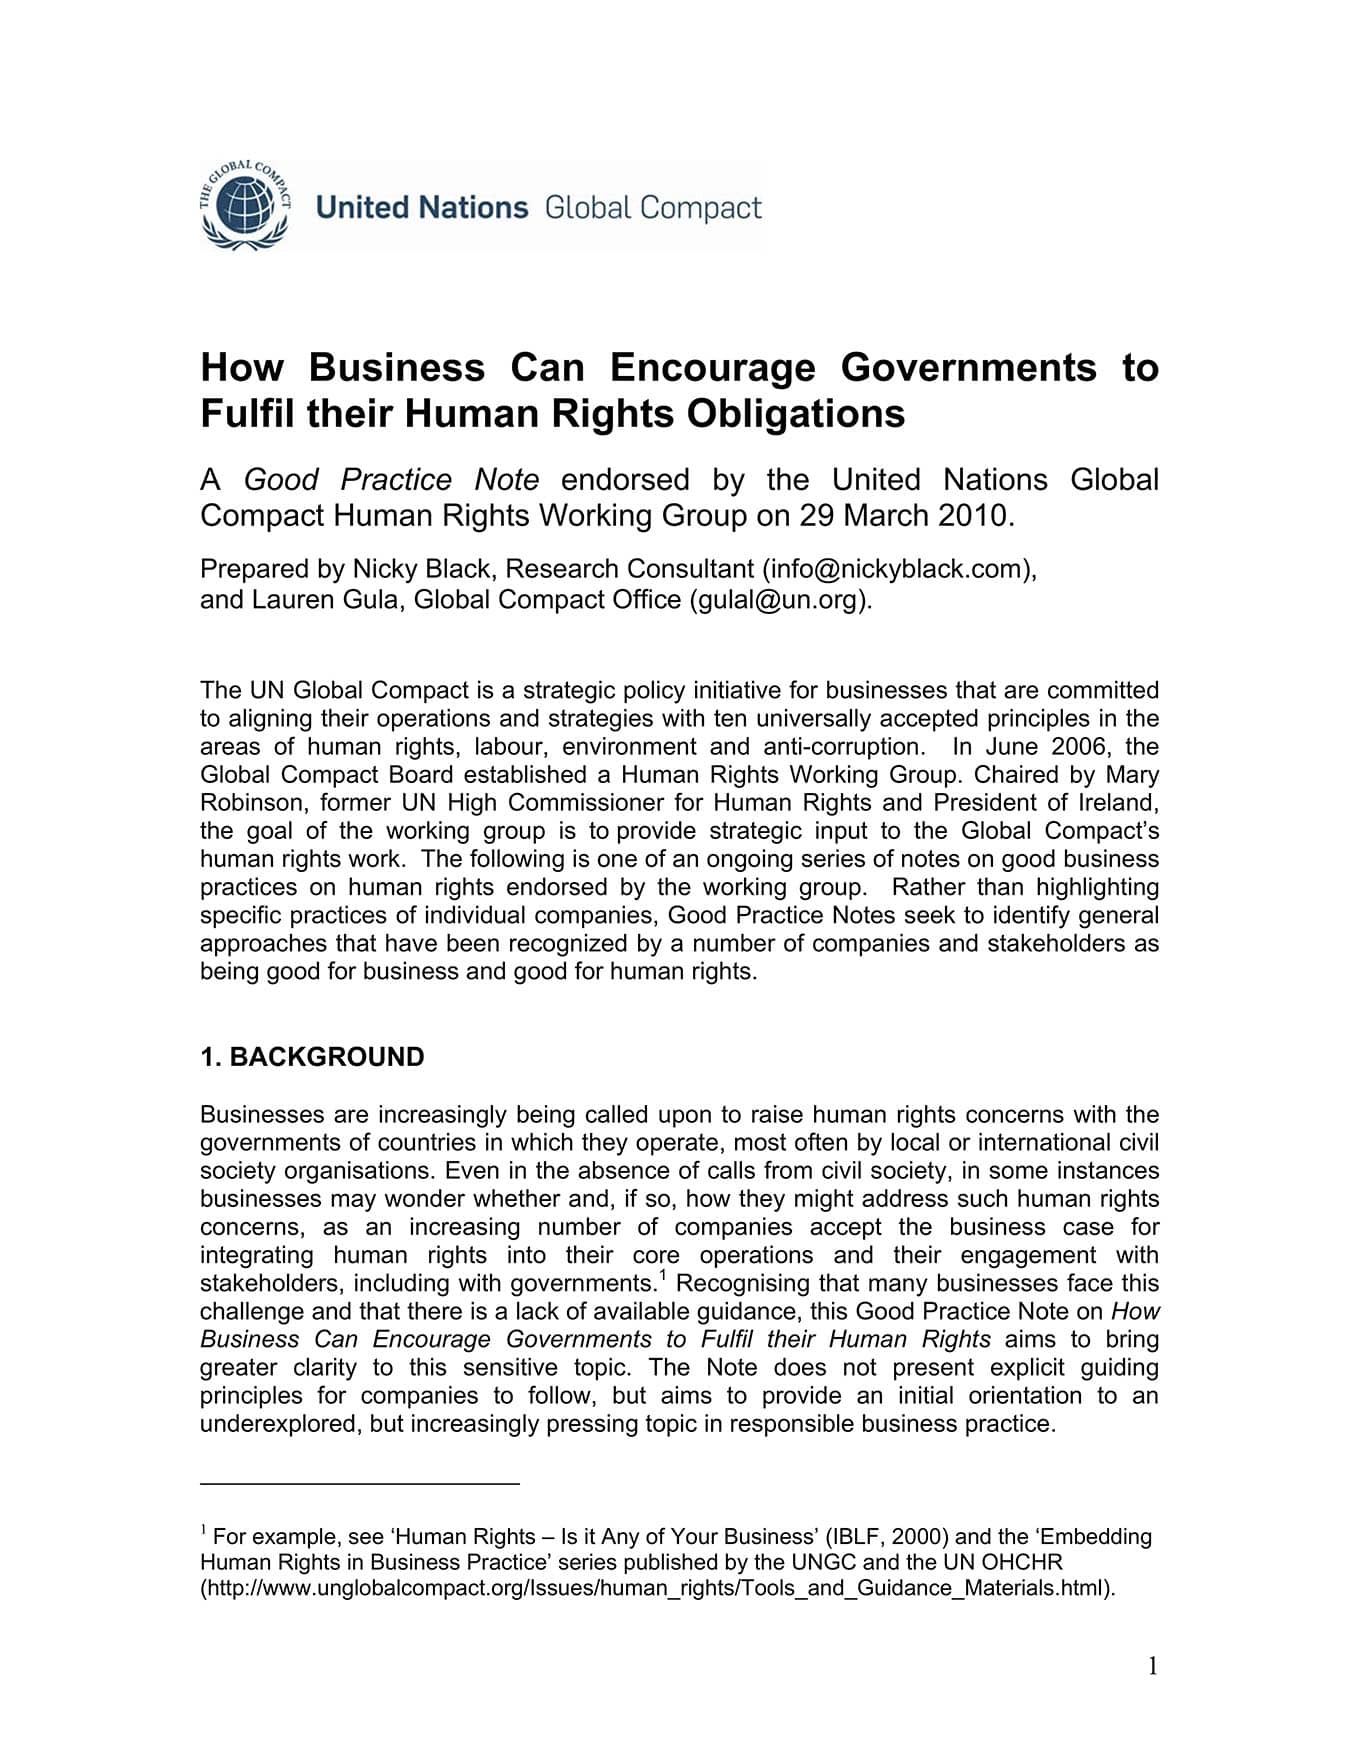 How Business Can Encourage Governments to Fulfil their Human Rights Obligations (United Nations Global Compact, 2010)